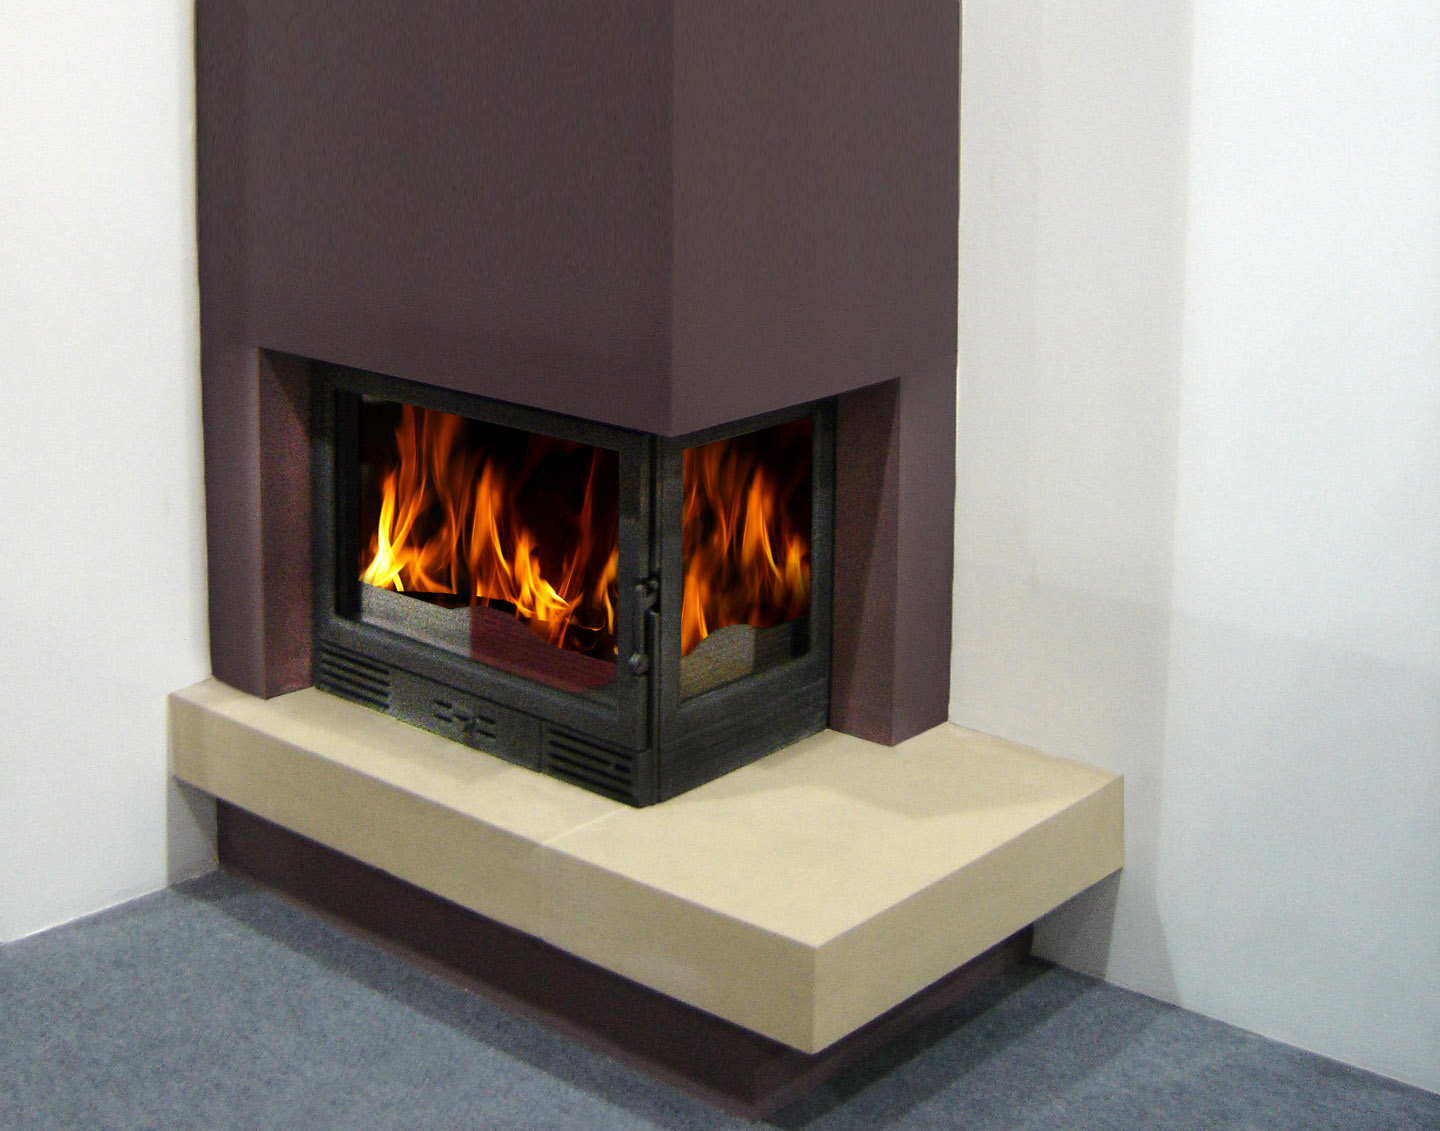 Installing Electric Fireplace Insert Fresh Special Offer Modern and Rustic Fireplace In Special